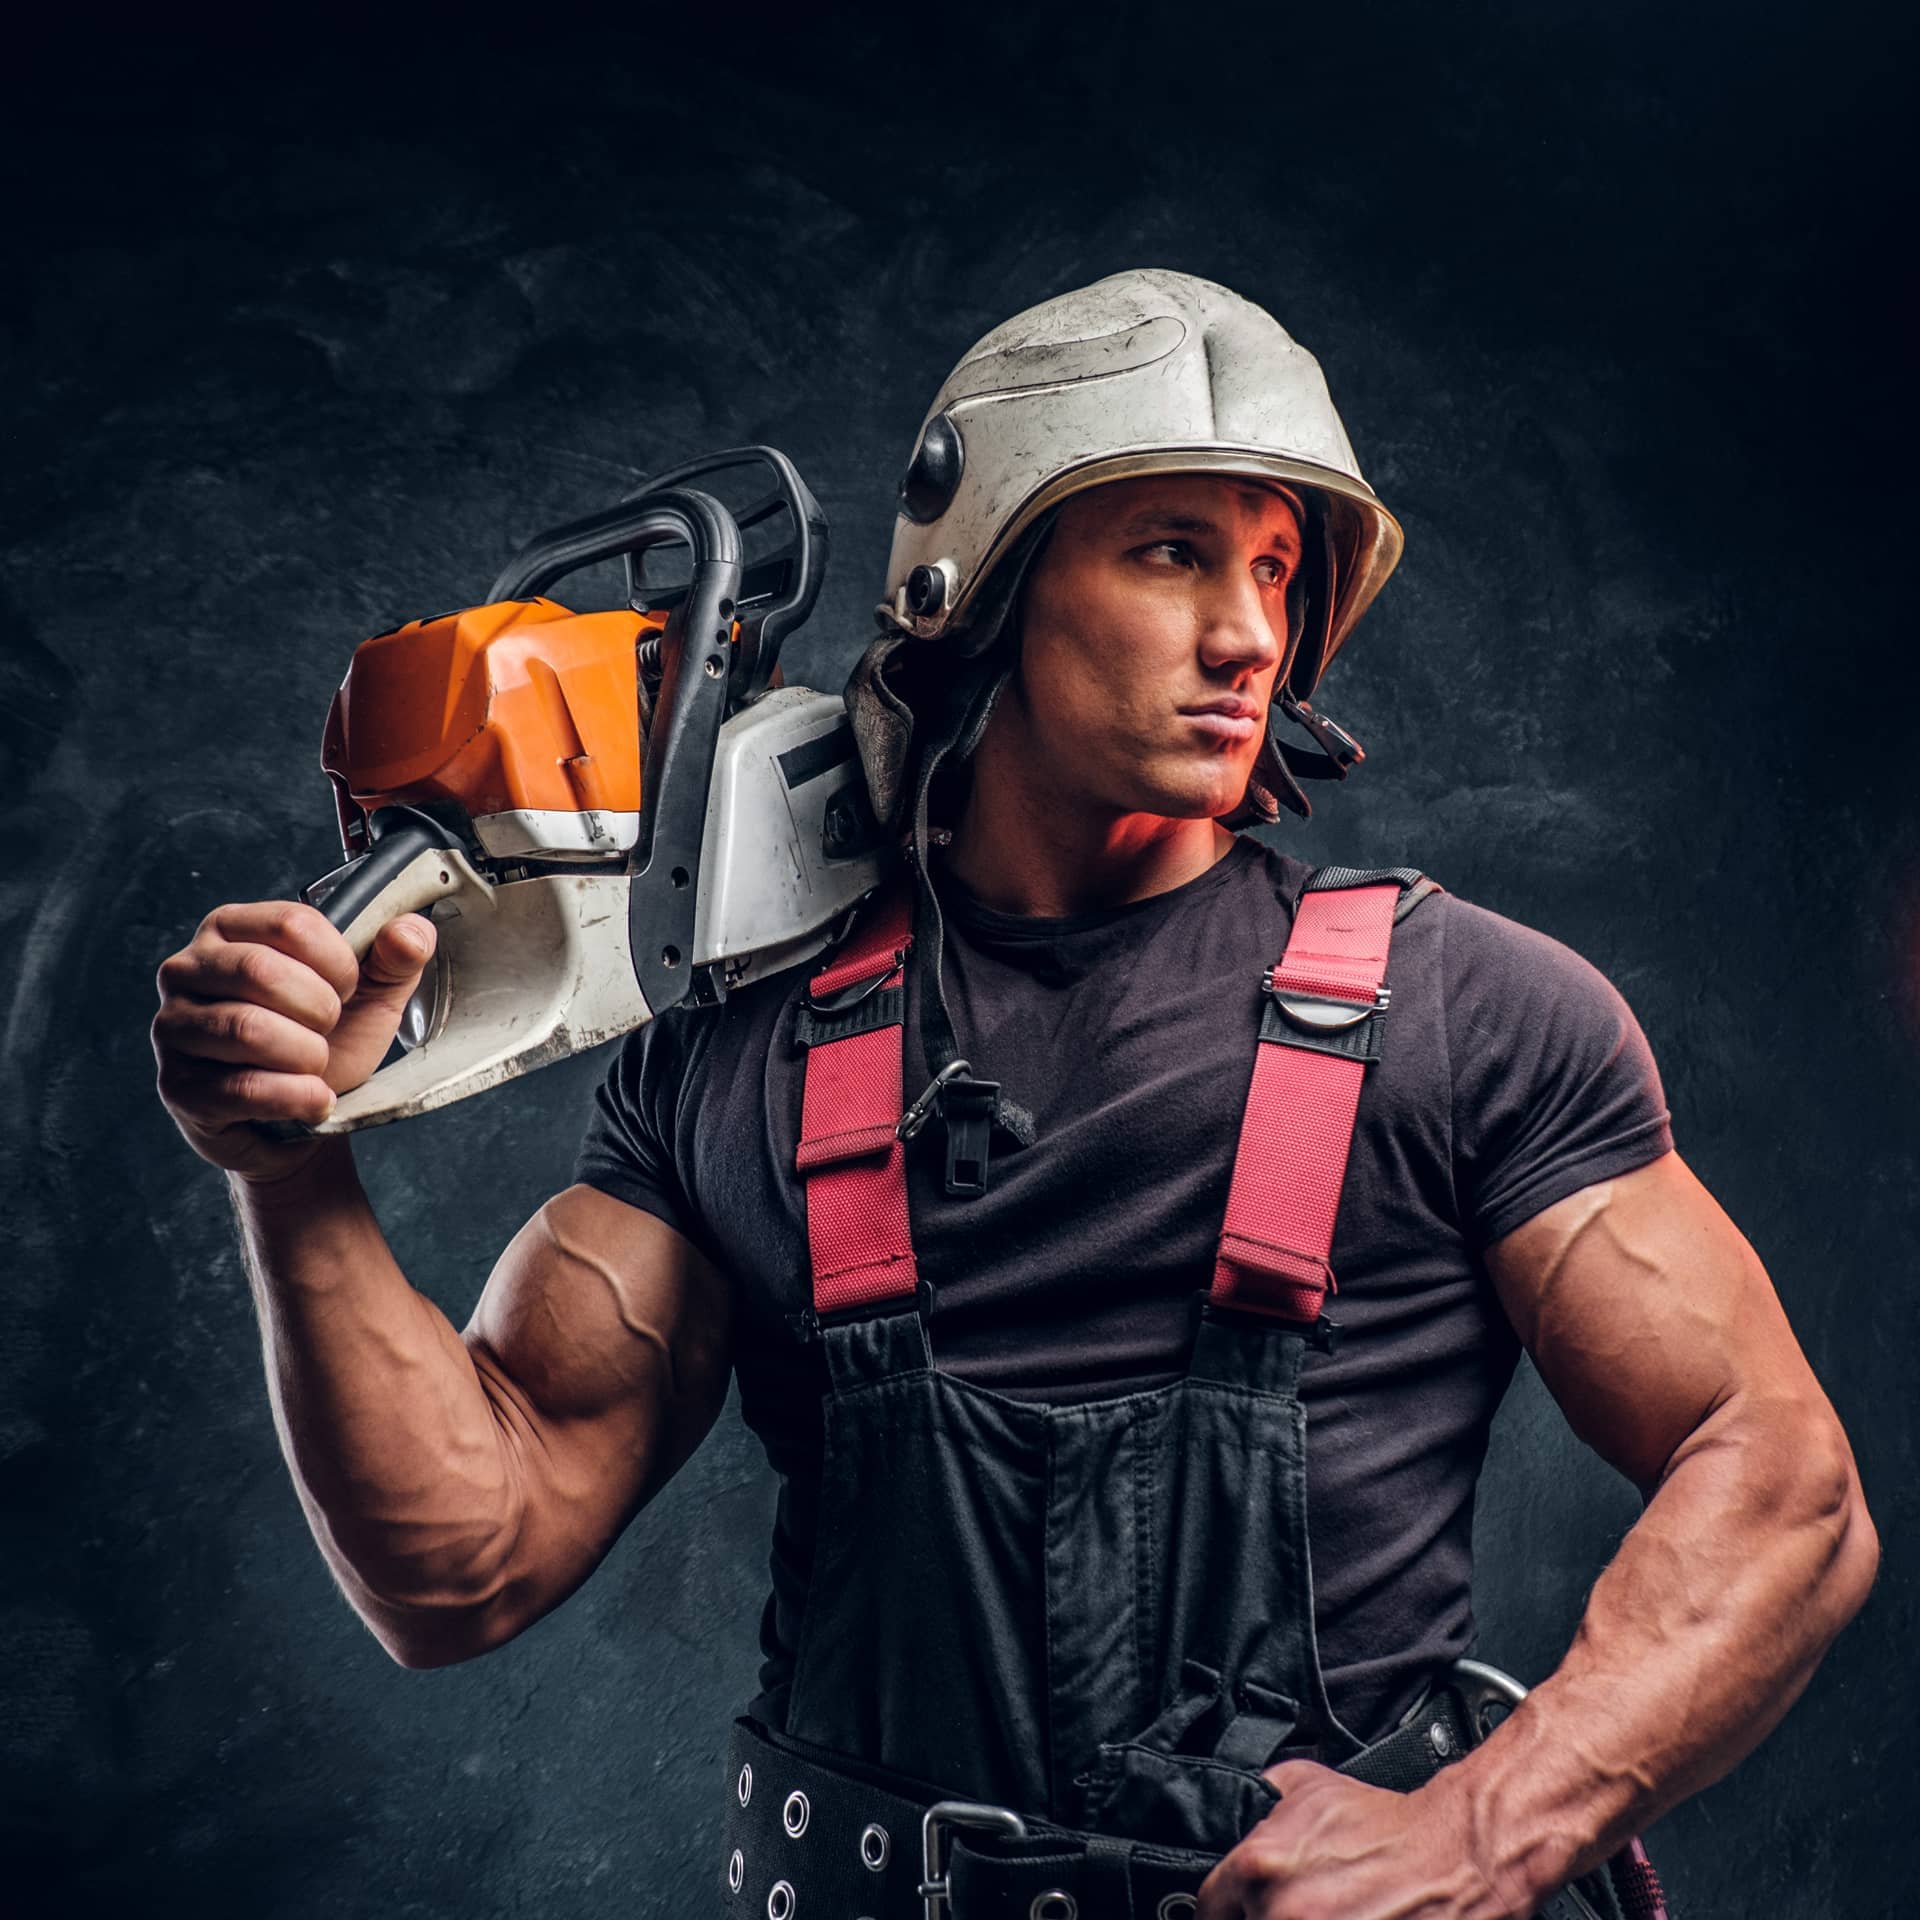 Wearing protective clothes posing with chainsaw looks sideways dark studio